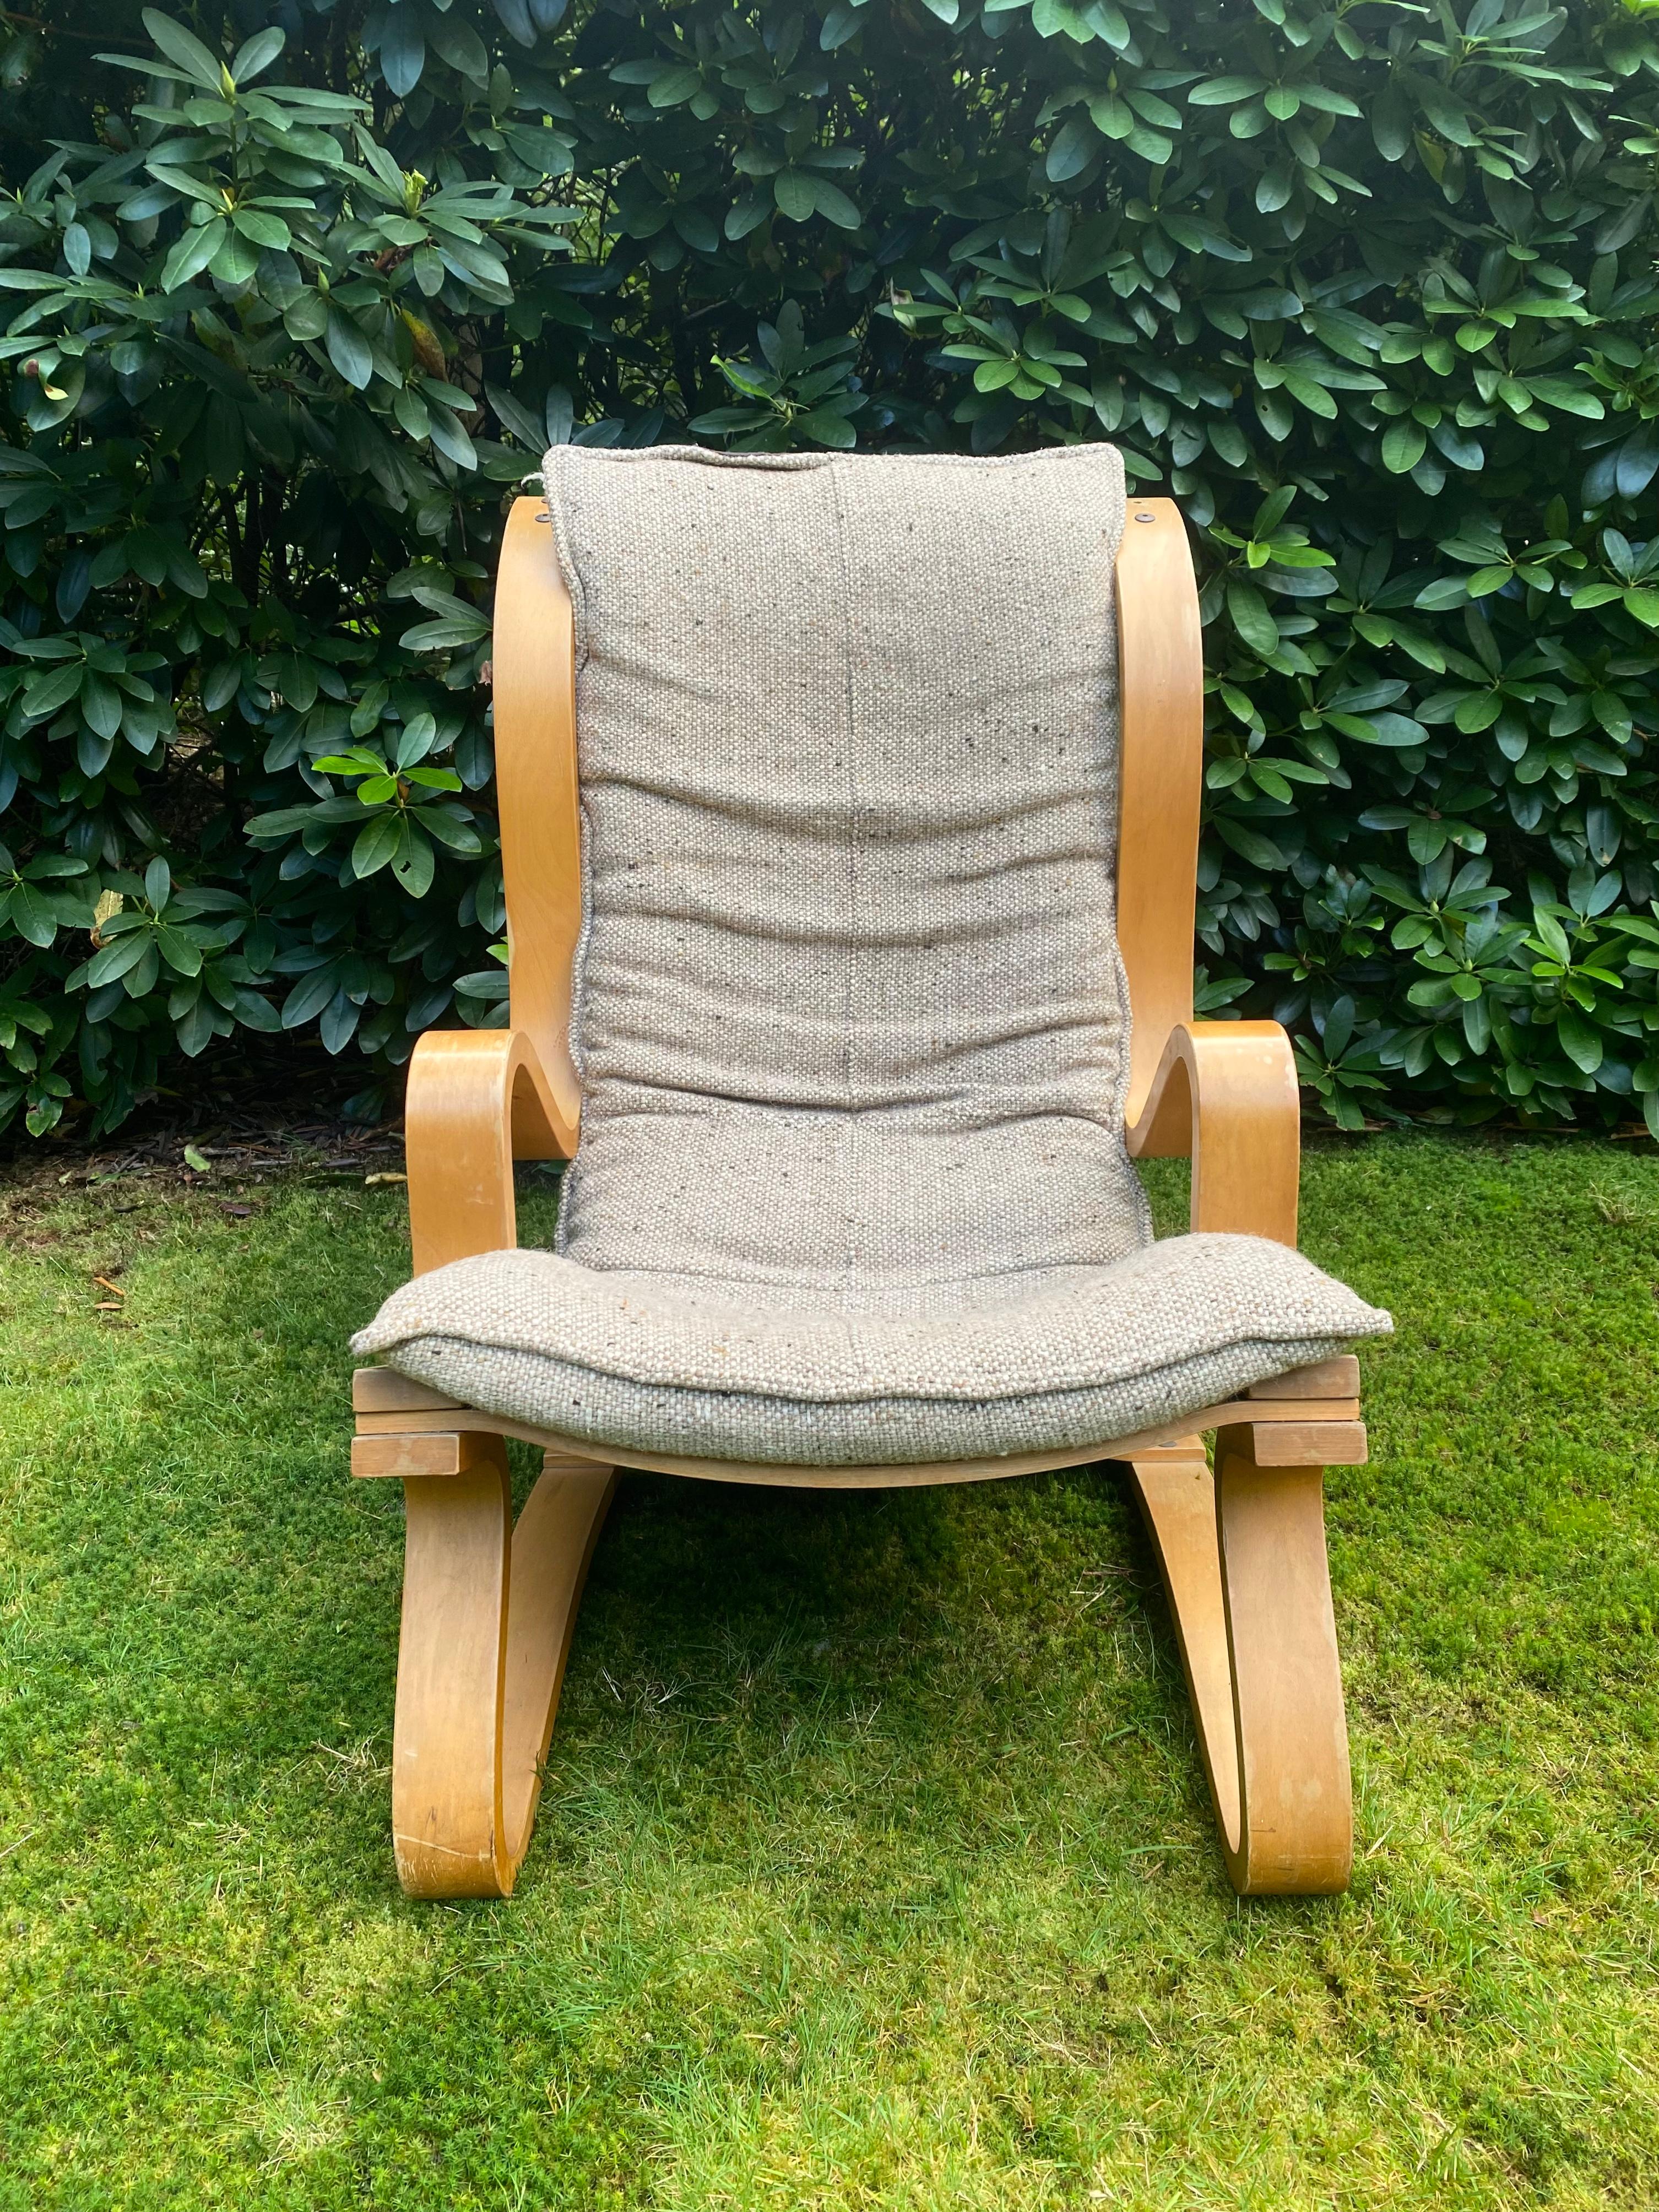 20th Century Scandinavian Laminated Beech Lounge Chair, in Style of Alvar Aalto, ca. 1960s For Sale